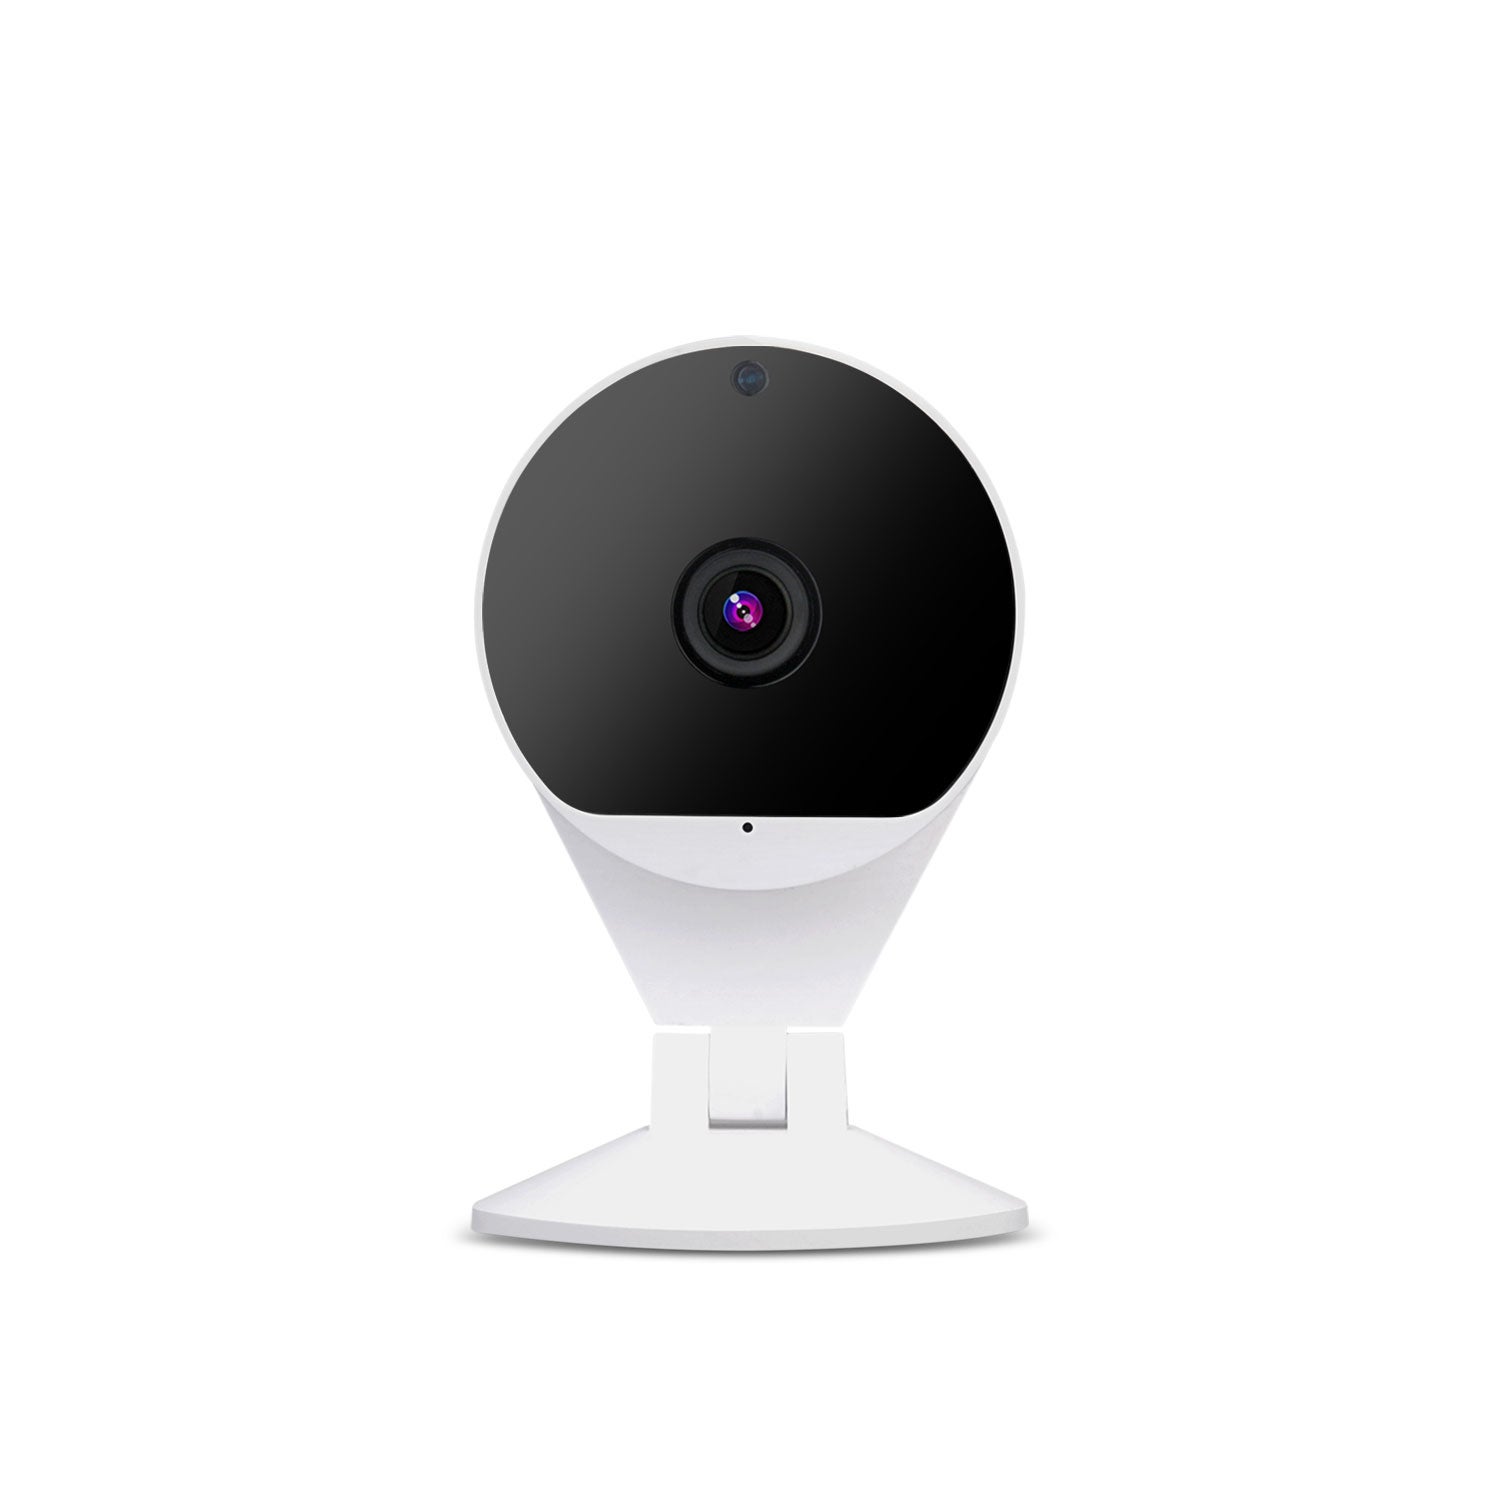 Laser HD Wi-Fi Security Camera - Smart Monitoring, Motion Detection, 1080p